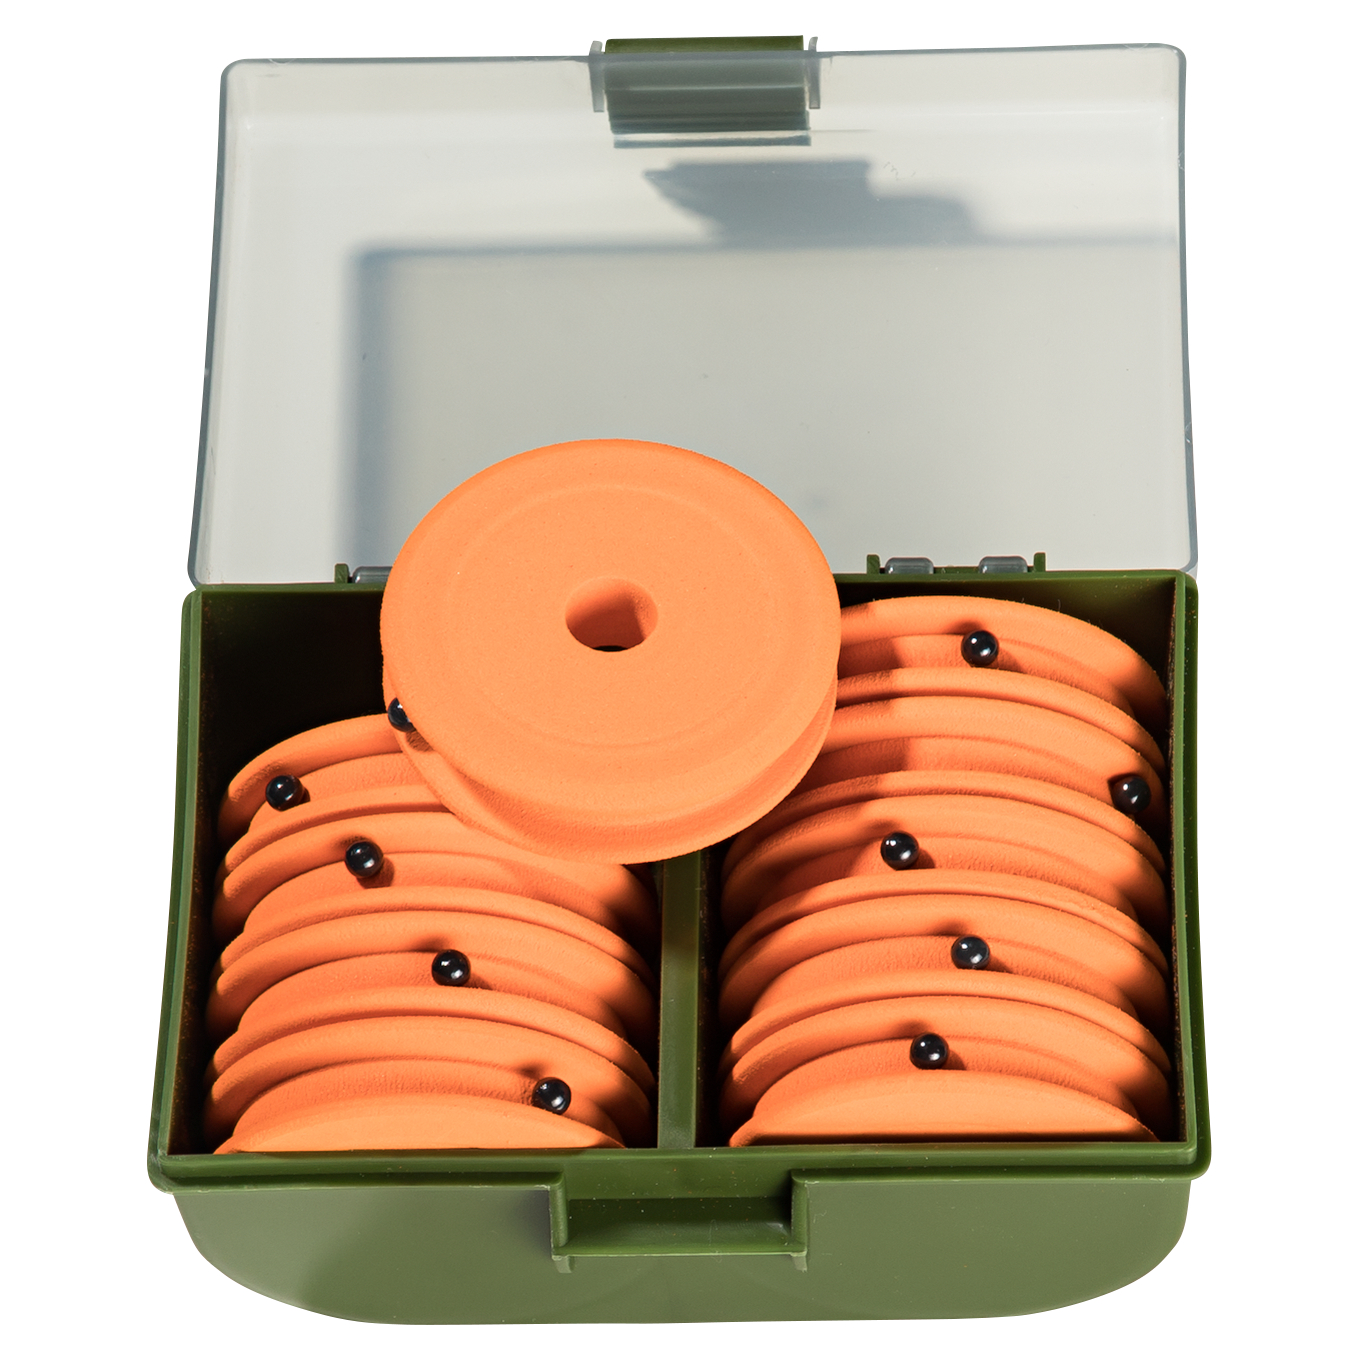 Kogha Chod/Zig Rig Box at low prices